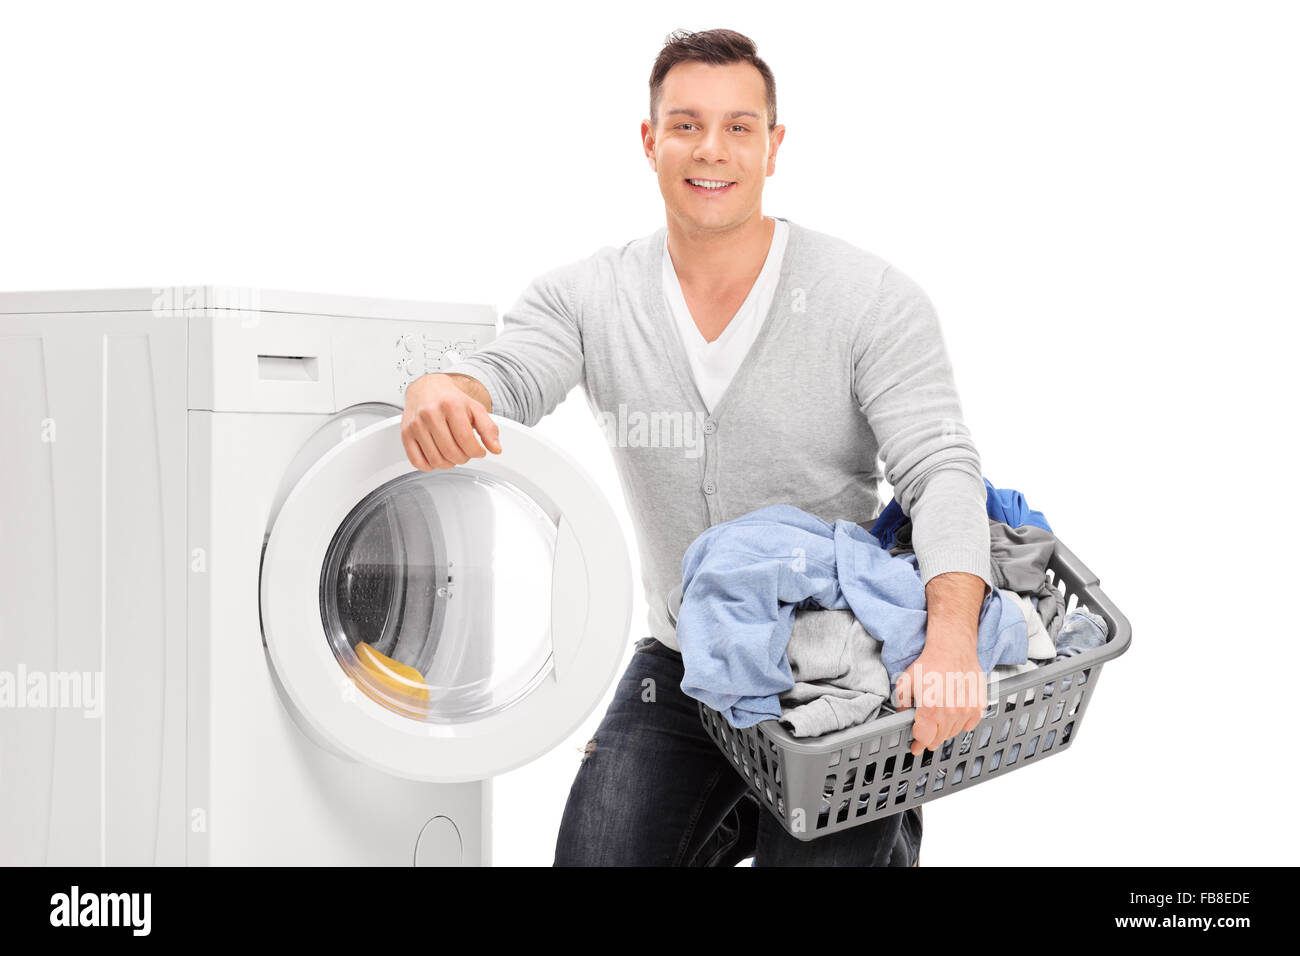 Content young man holding a laundry basket and standing next to a washing machine isolated on white background Stock Photo